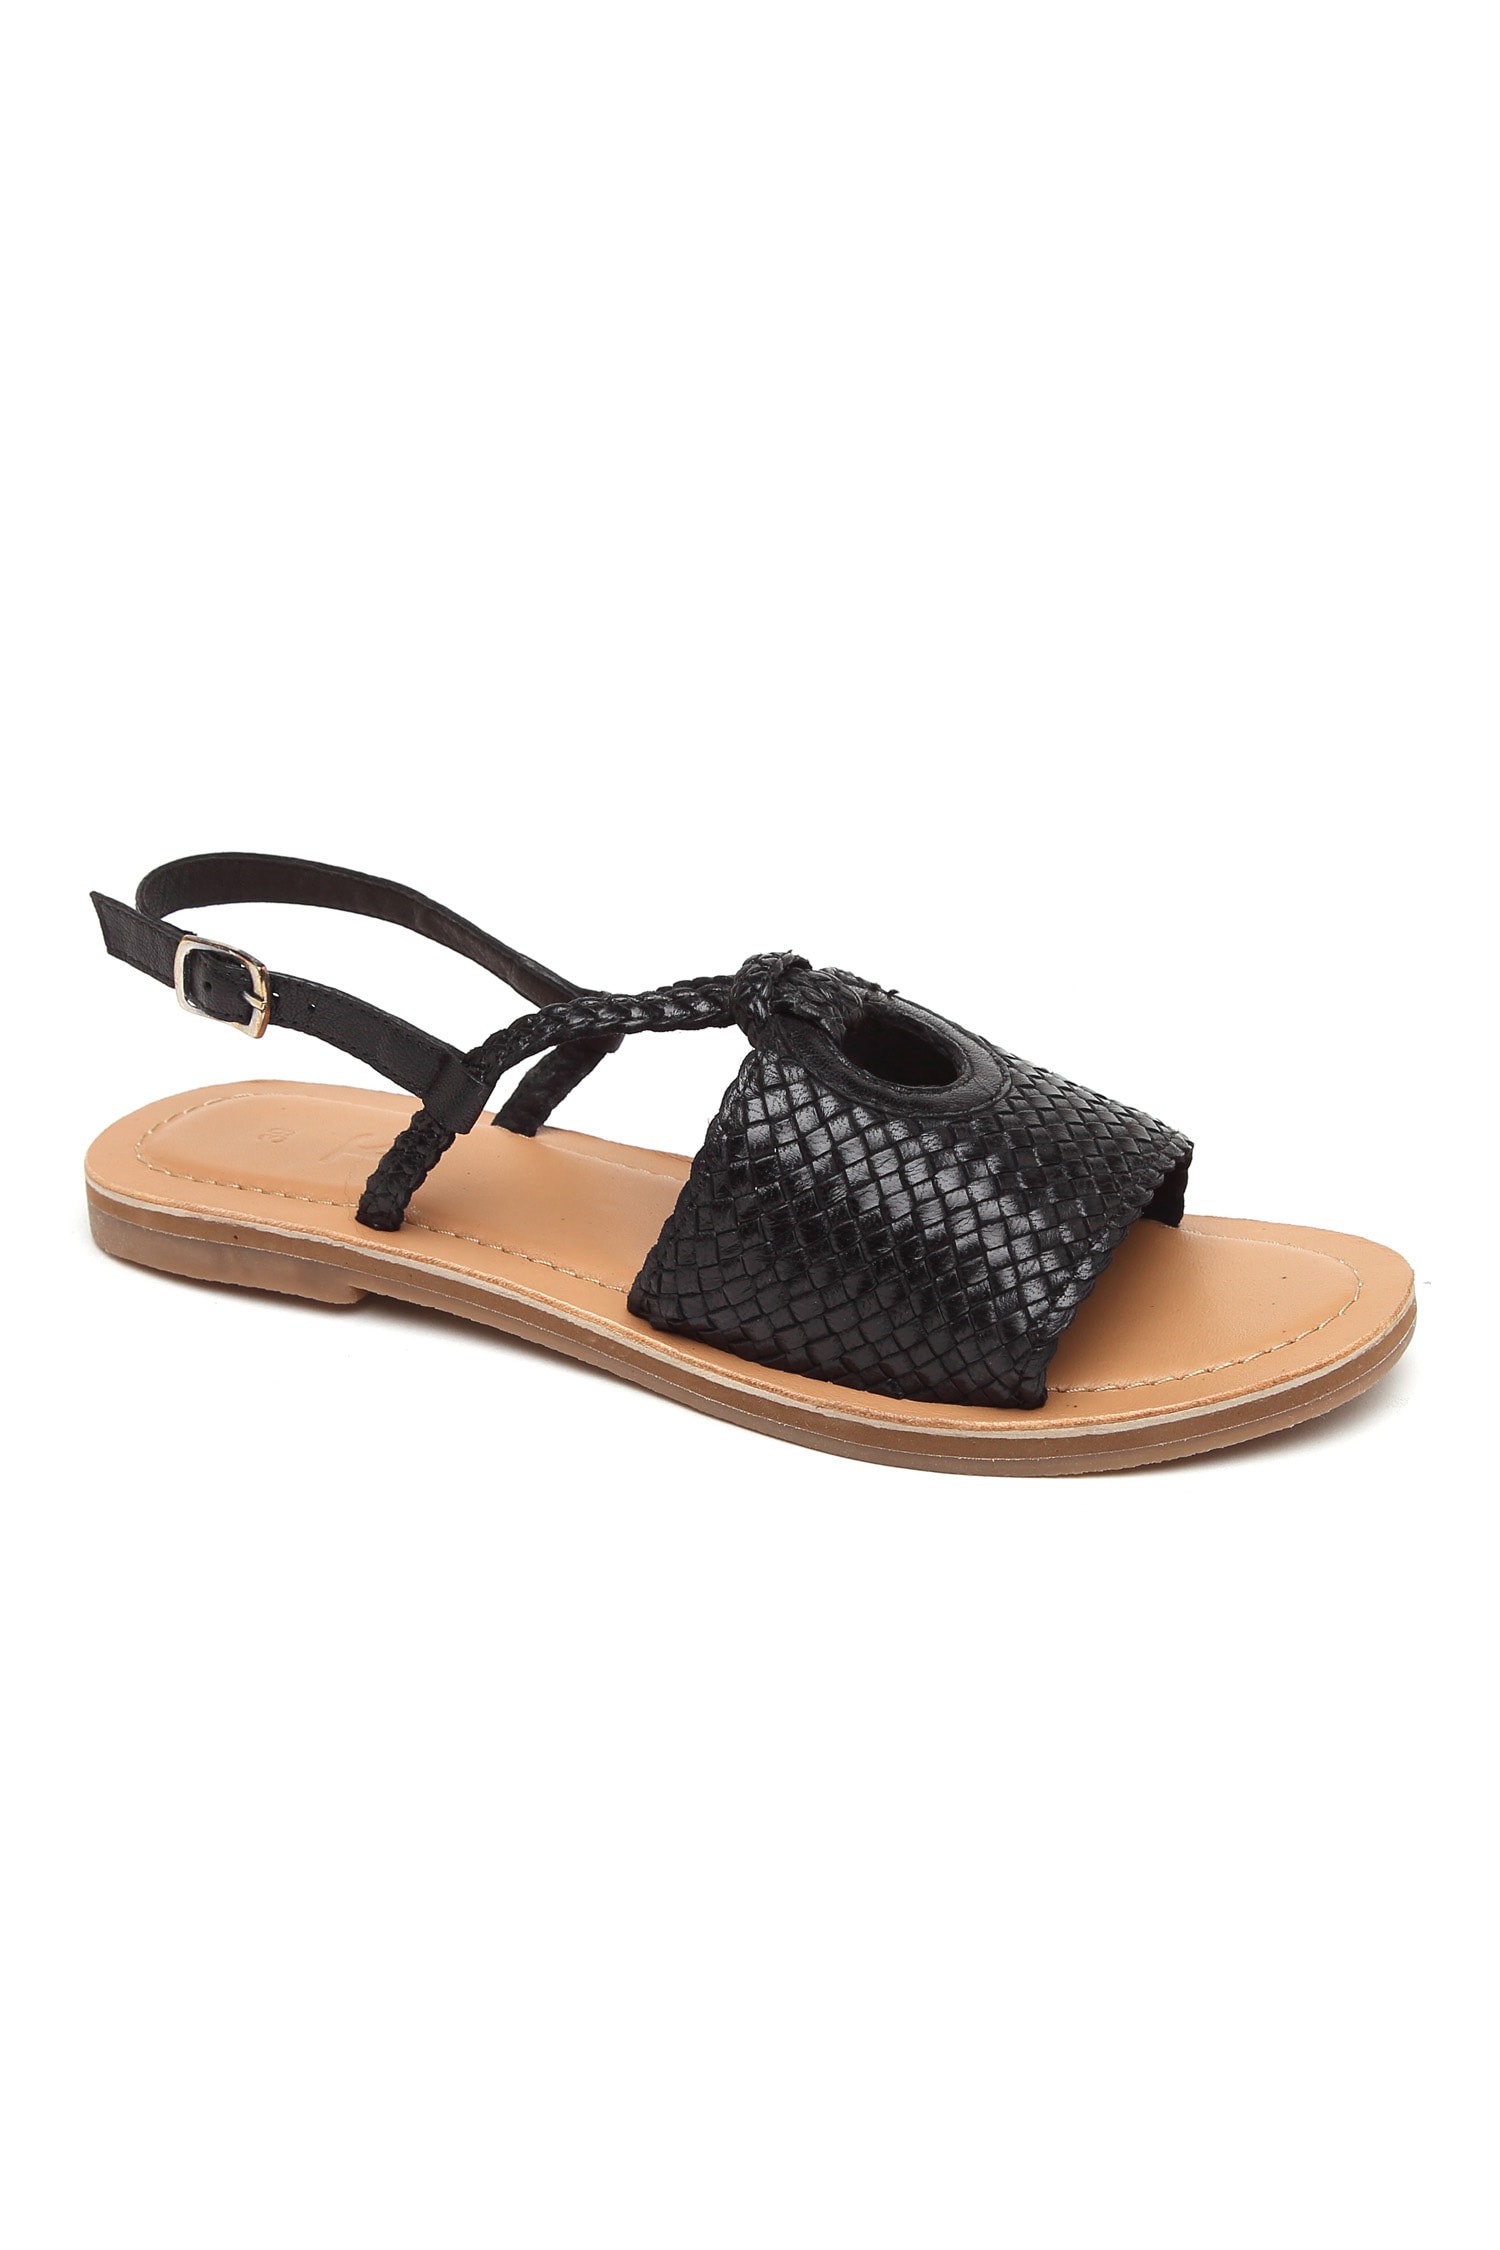 Buy Tissr Black Woven Leather Sandals Online | Aza Fashions